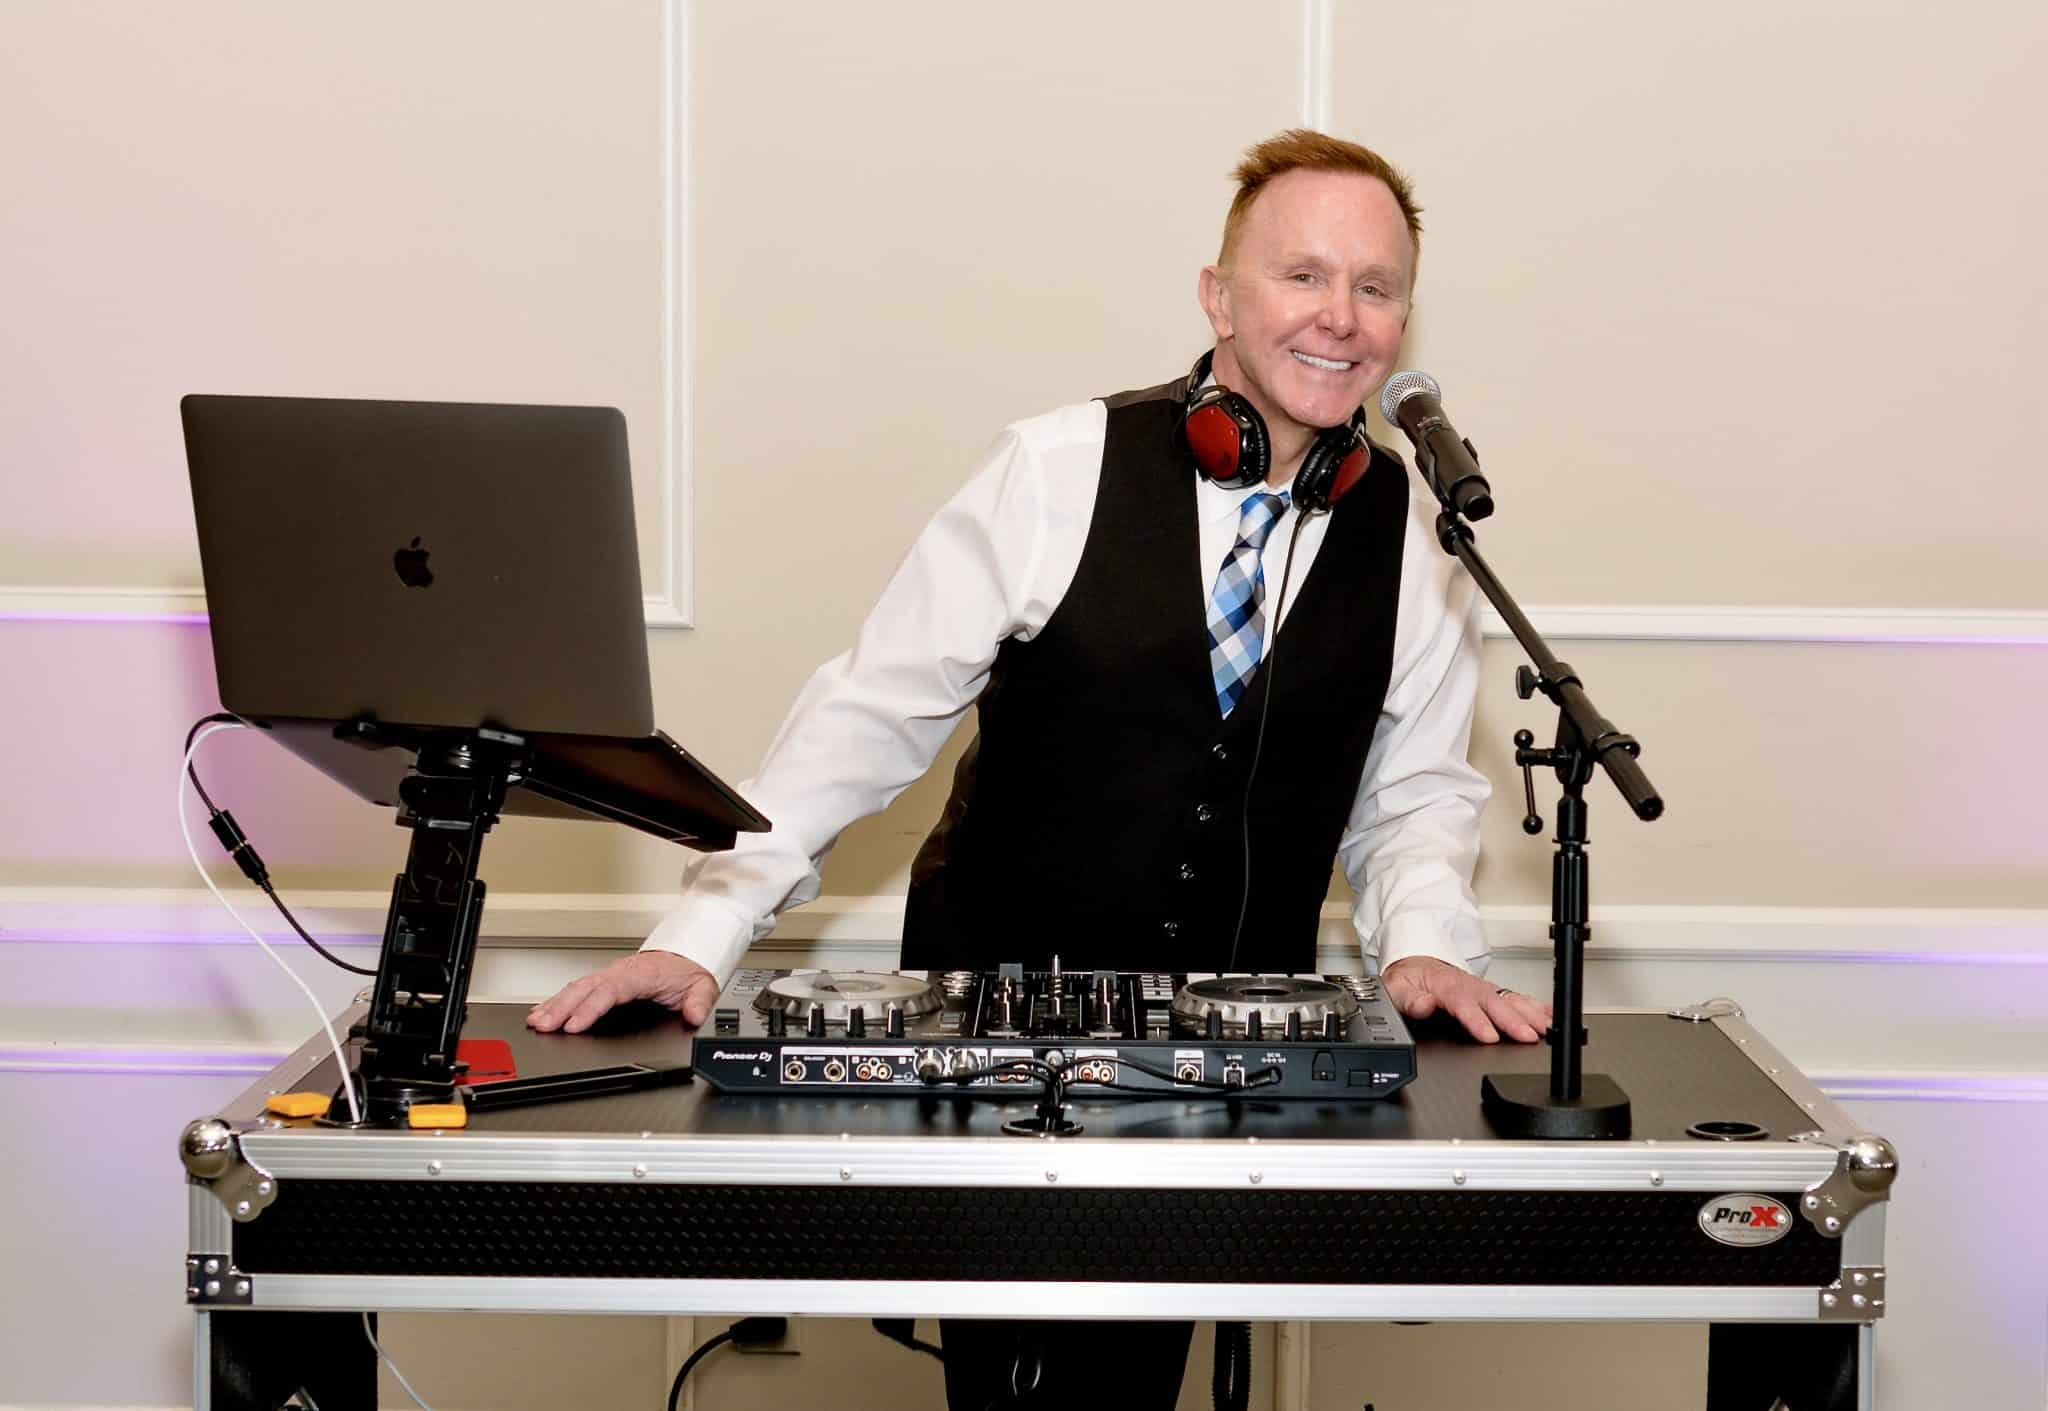 DJ Allen smiling for the camera as he provides music and entertainment for his guests, Diamond Dj Events, Orlando, FL